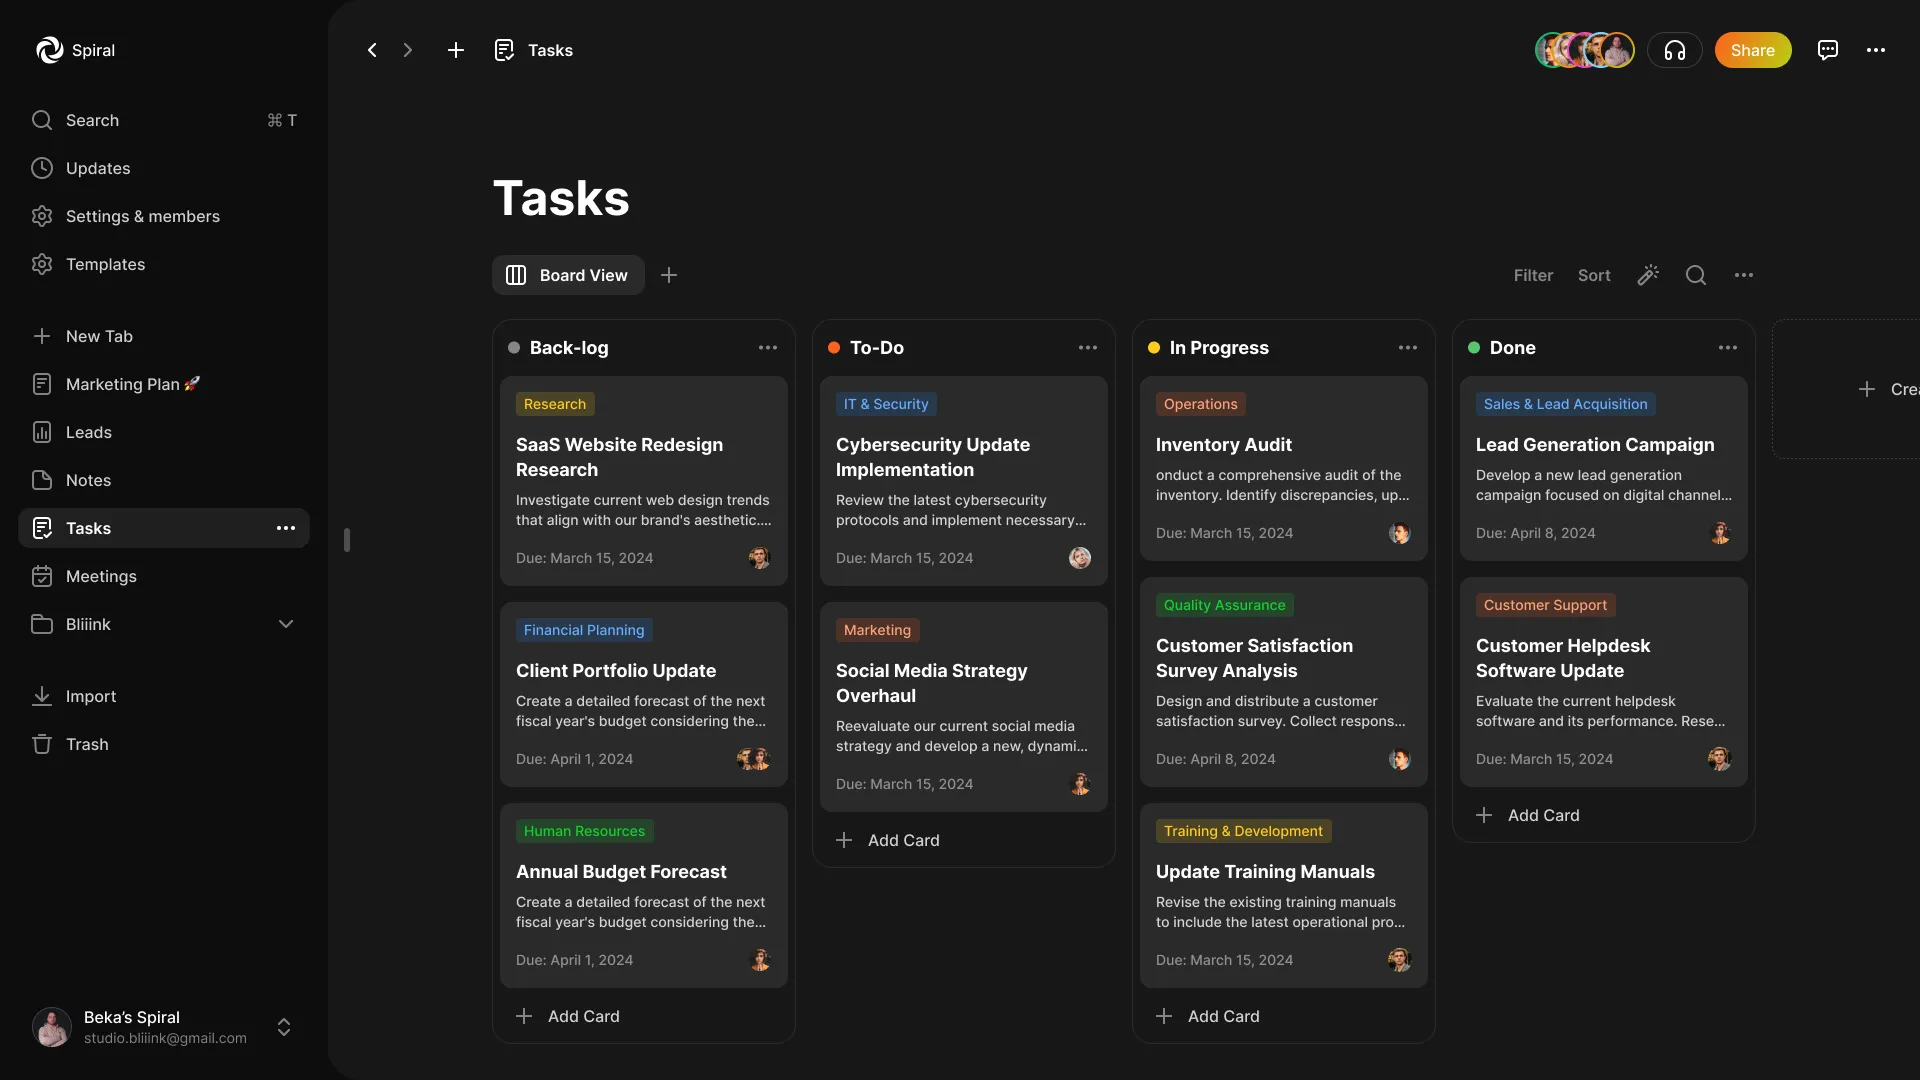 A screen of a platform named as Spiral, where it shows task management view in collaborative mode